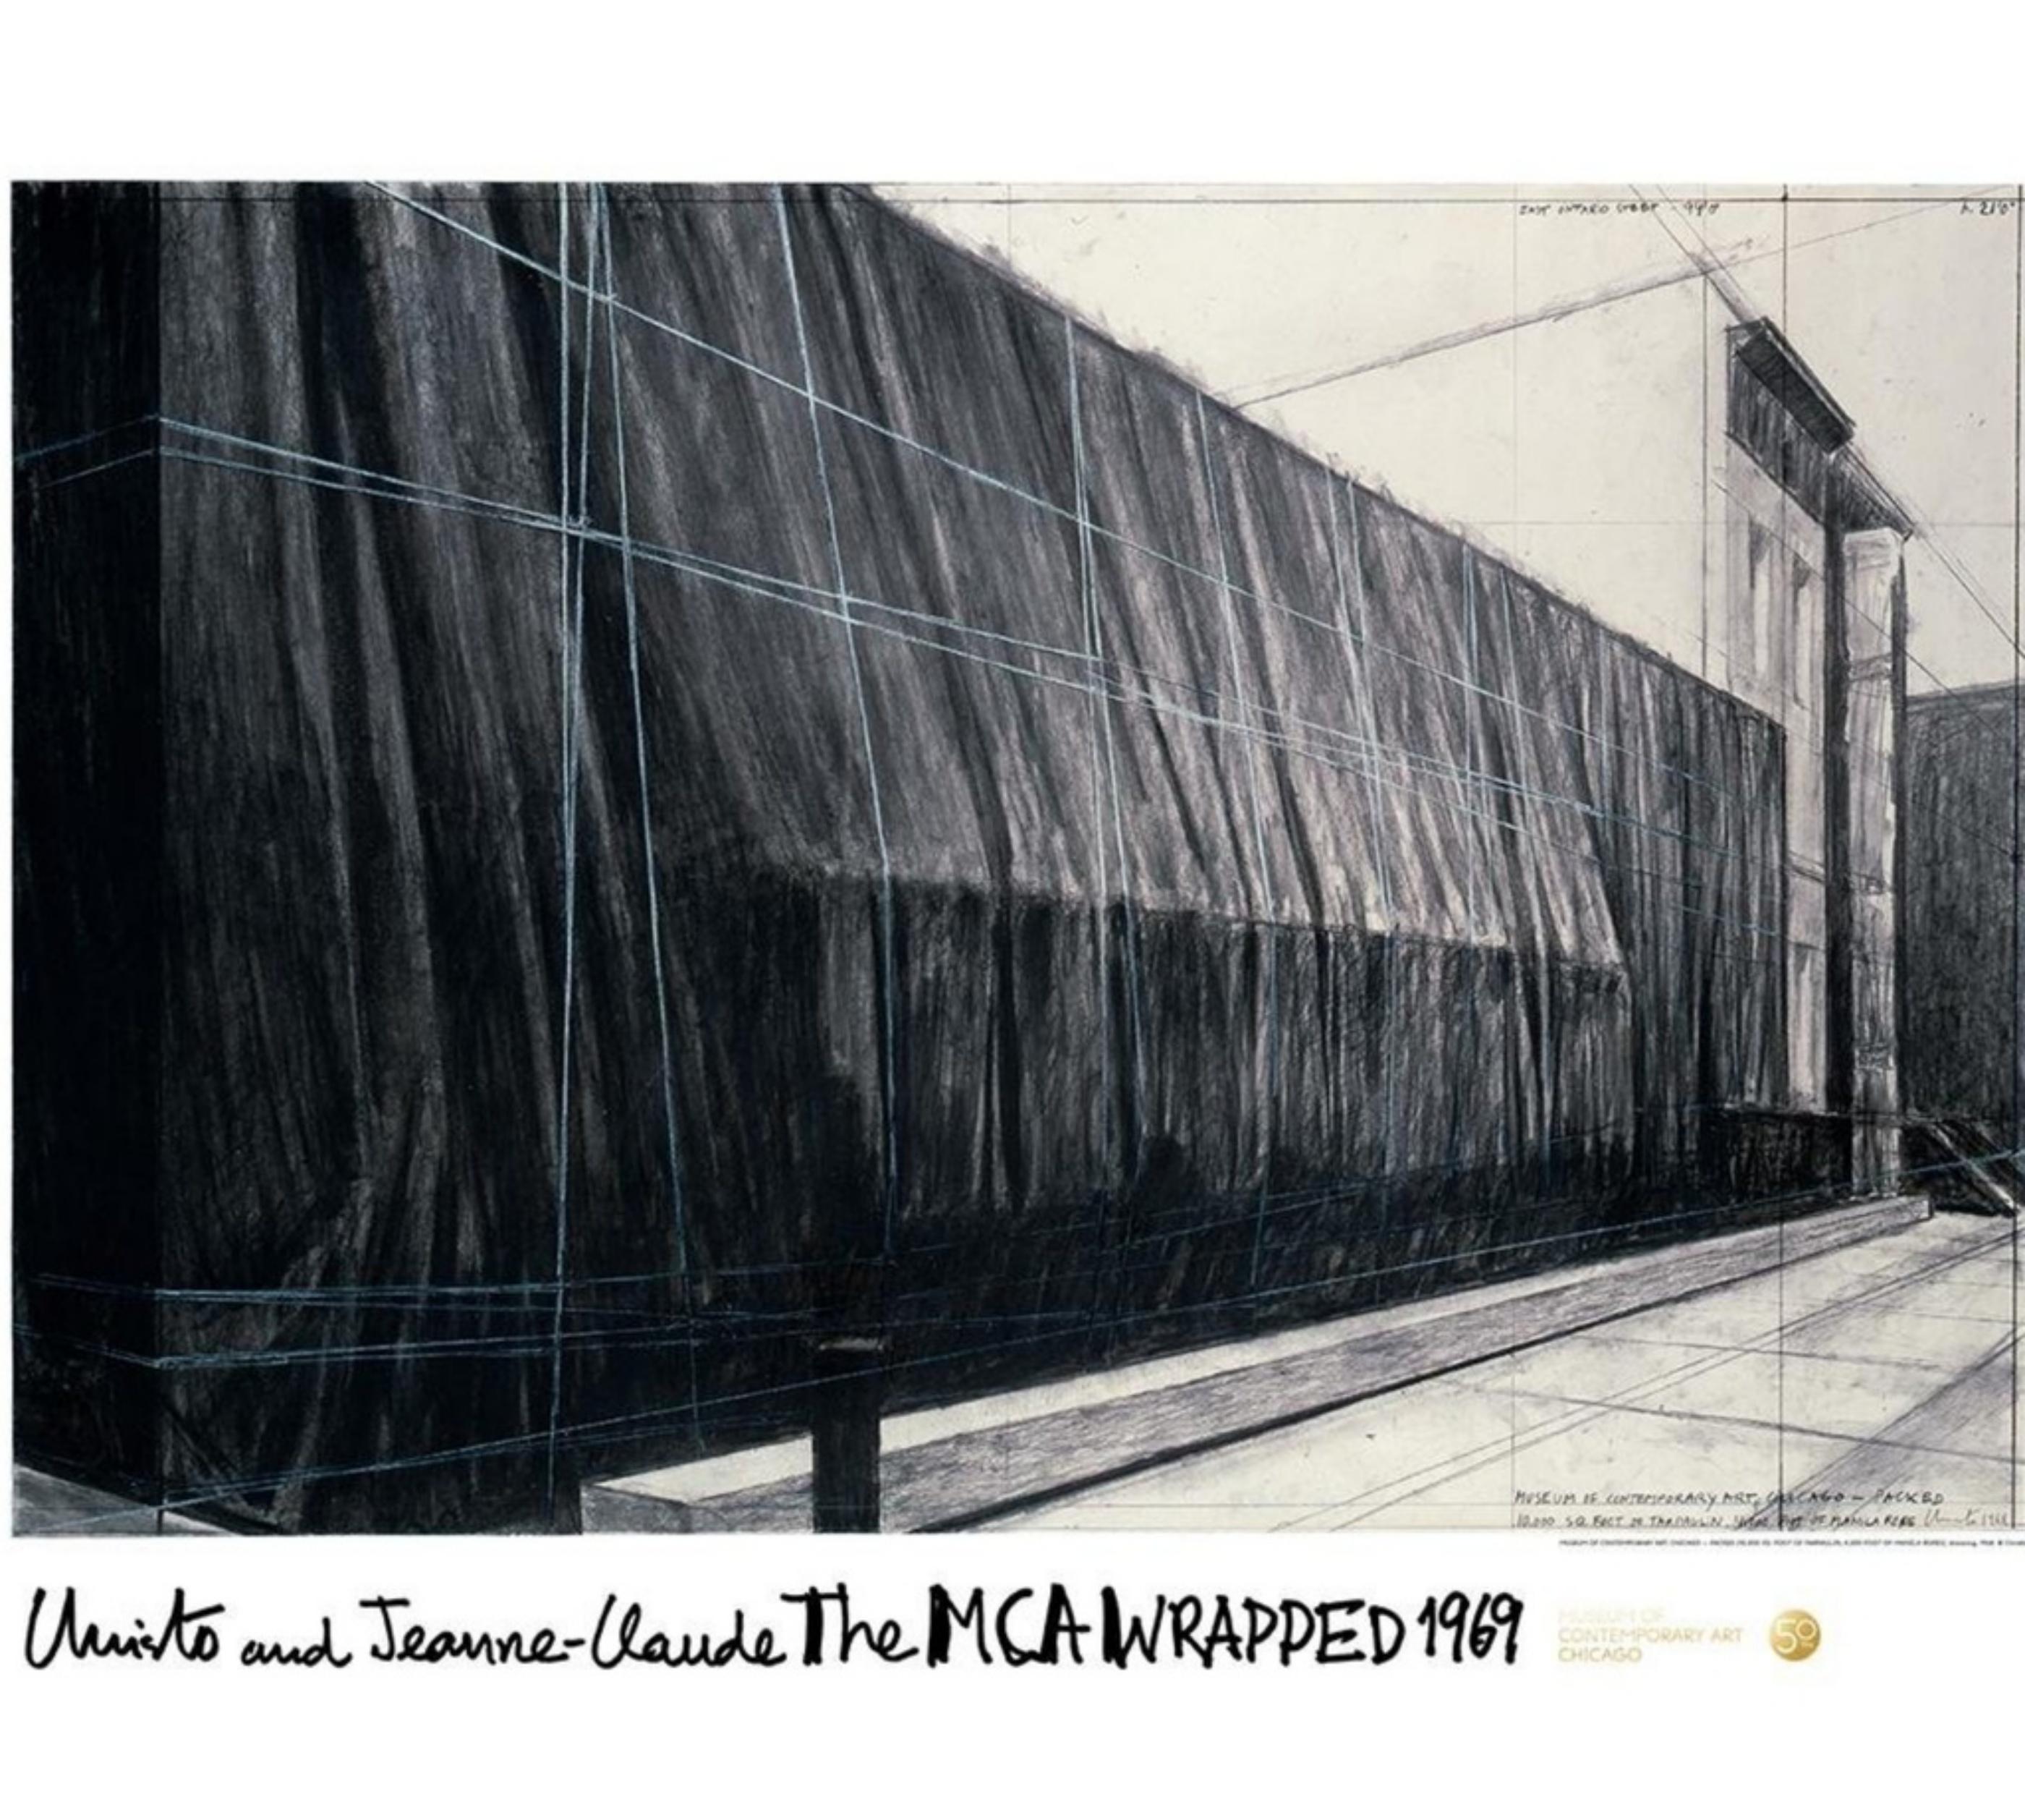 Christo Abstract Print - The MCA Wrapped, 1969 (Limited Edition)